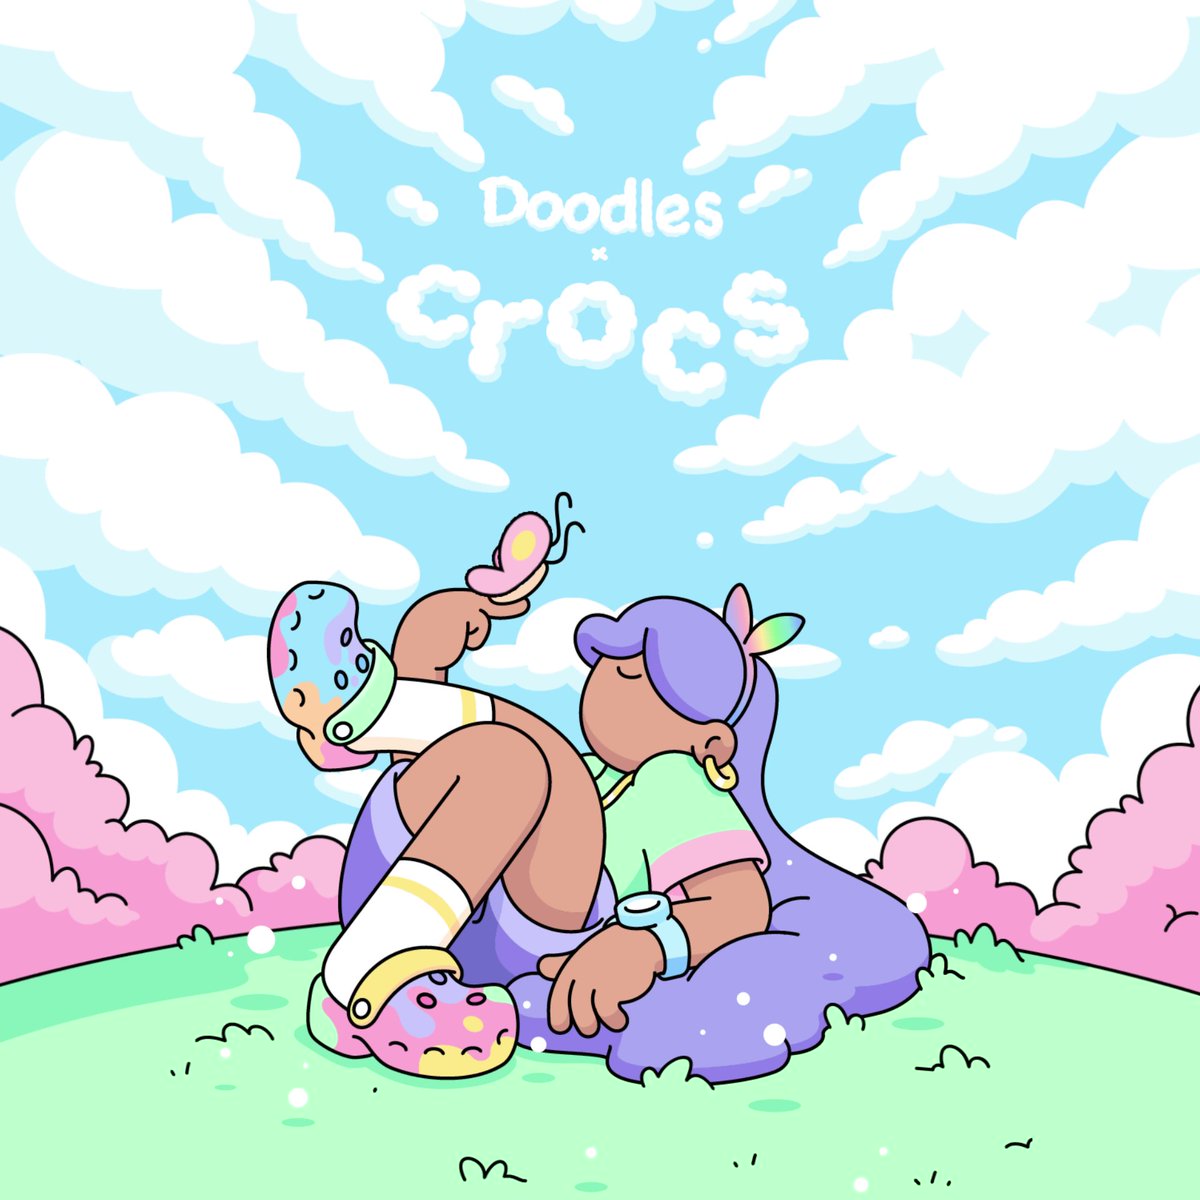 Doodles is Teaming Up With Footwear Giant Crocs on an Exciting New Collaboration